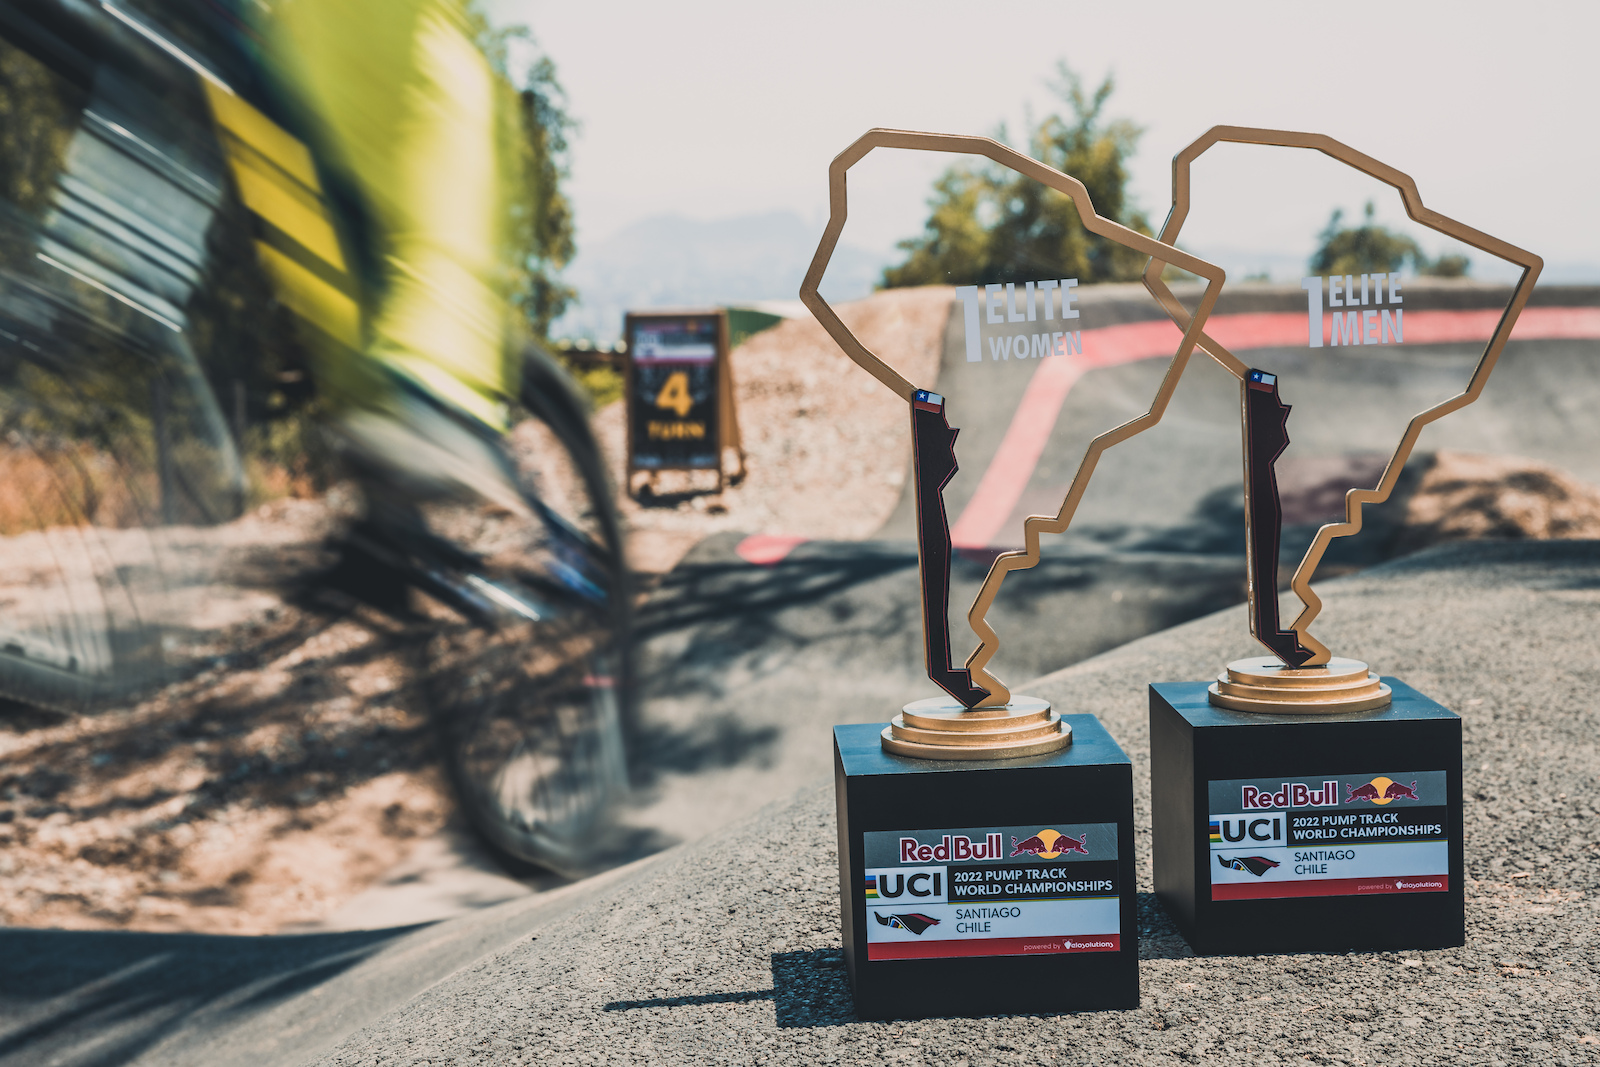 The practice was underway and two single-minded racers would be presented with these trophies in just a few hours time.